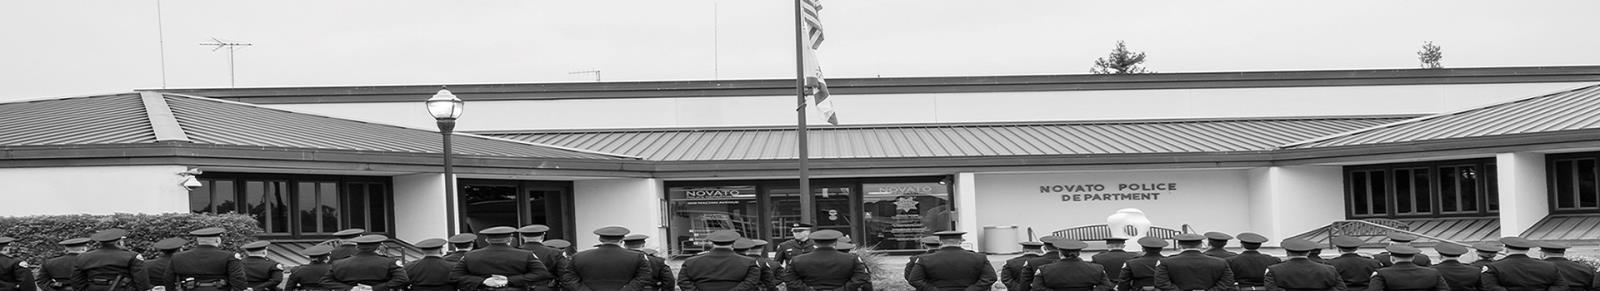 Police staff in front of the Police Department